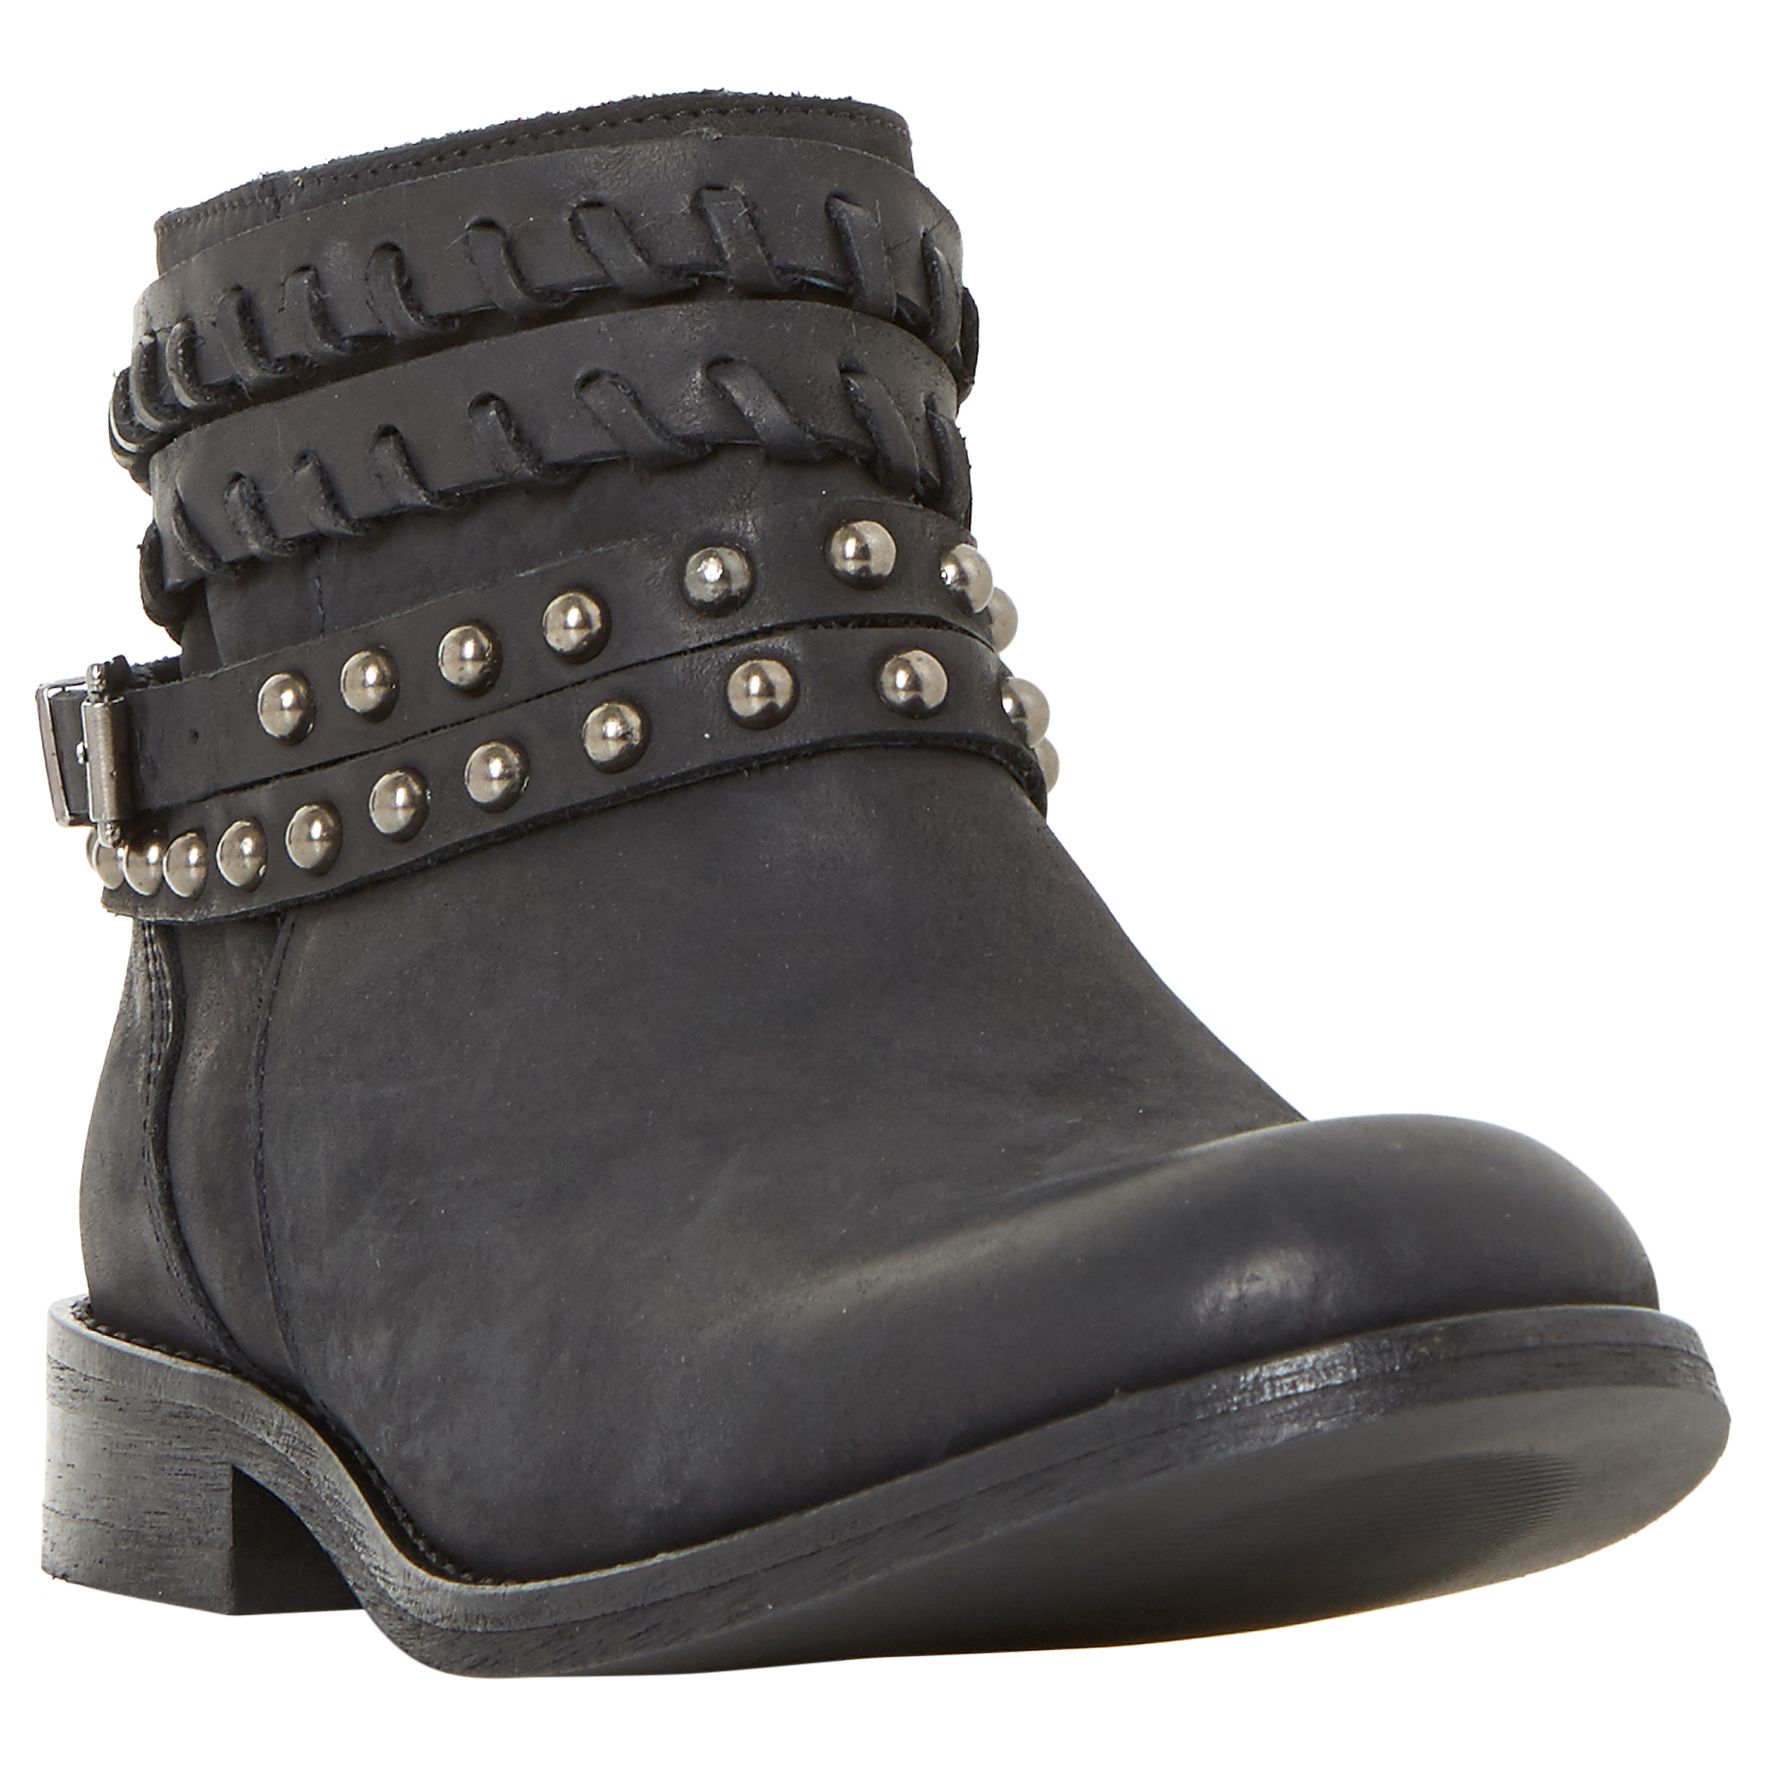 Bertie Parader Studded Strap Ankle Boots, Black, 8